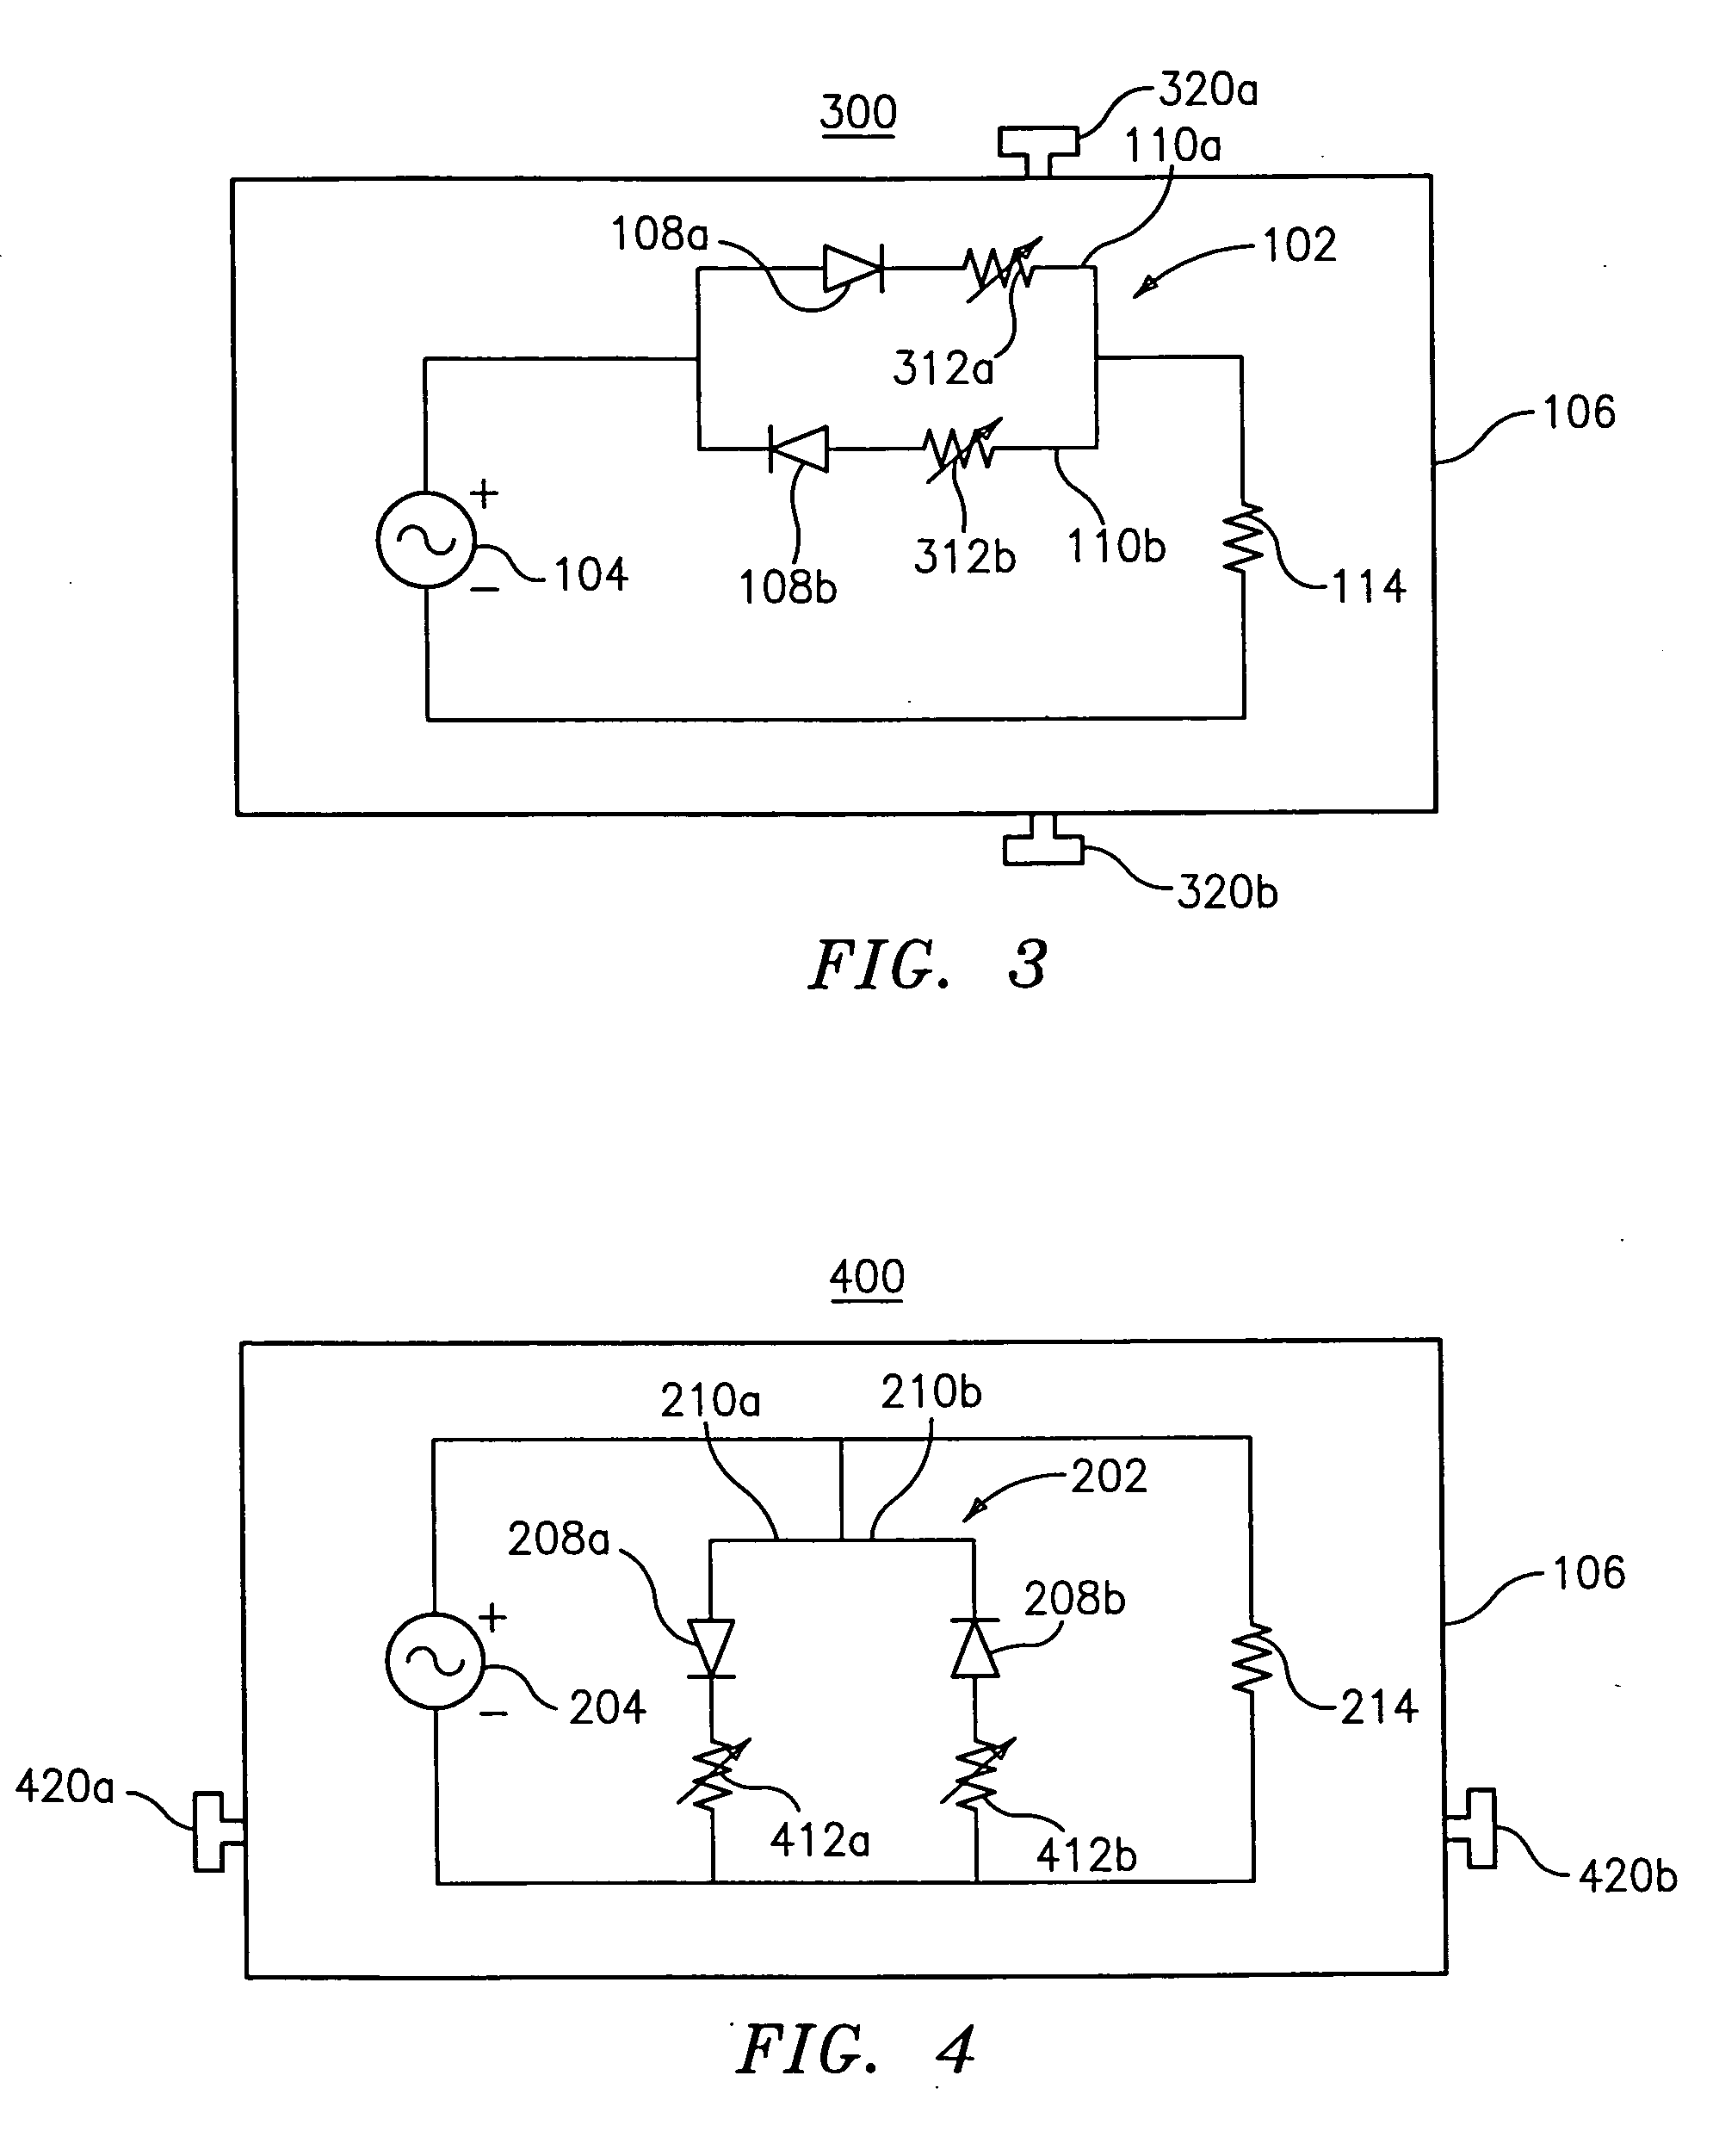 Circuit for controlling arc energy from an electrosurgical generator